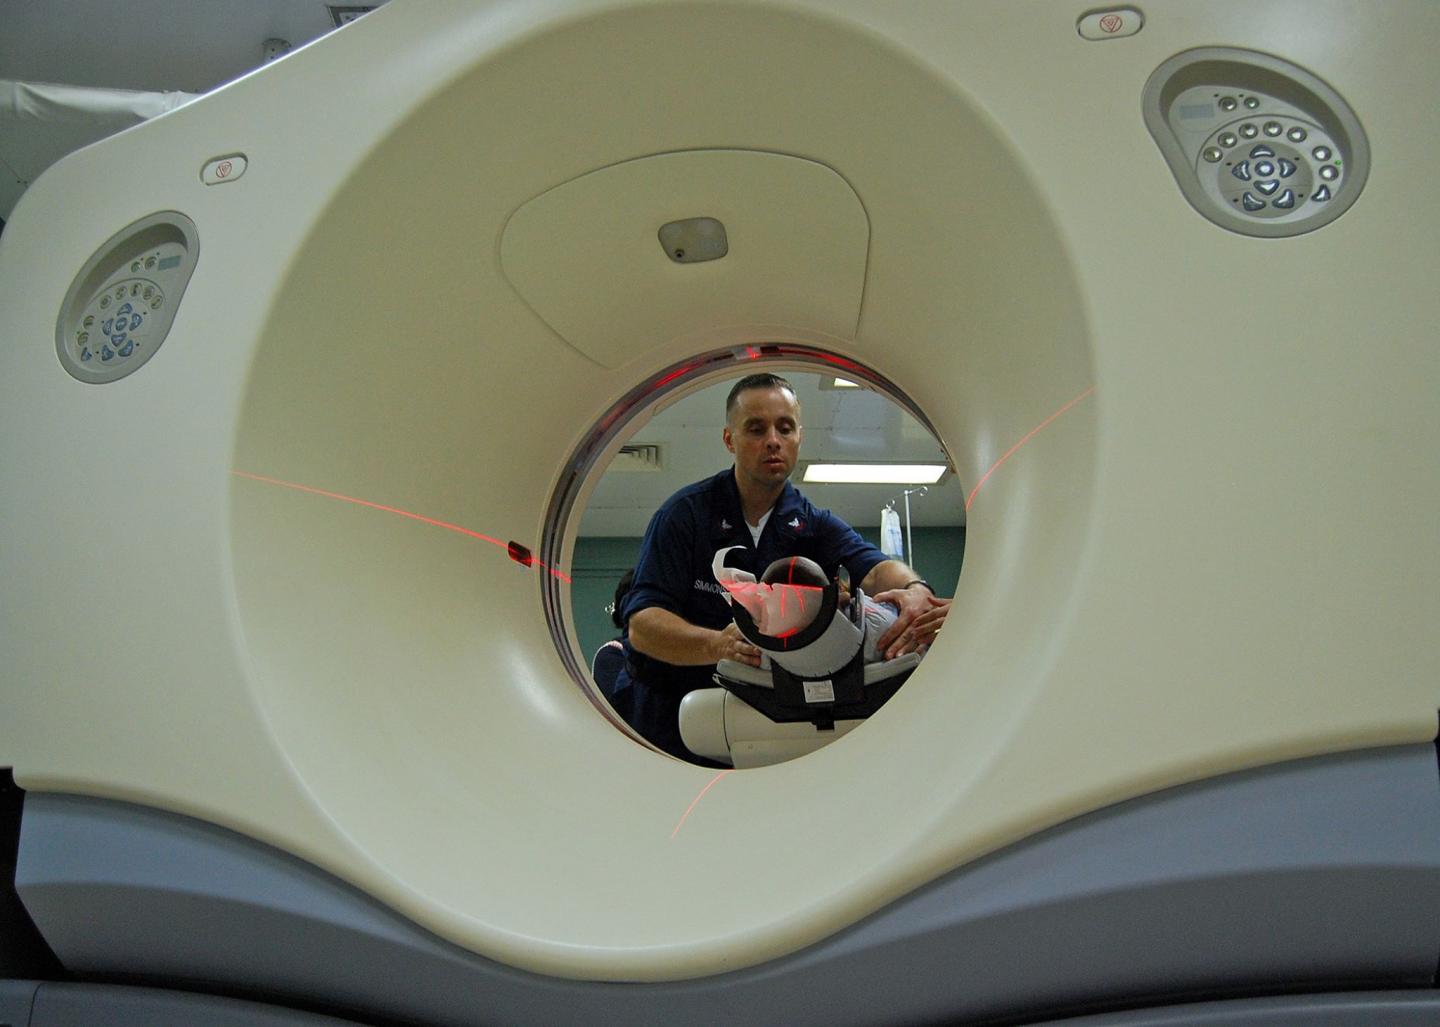 Whole Body CT Scans the Key to Cutting Time in Emergency Departments